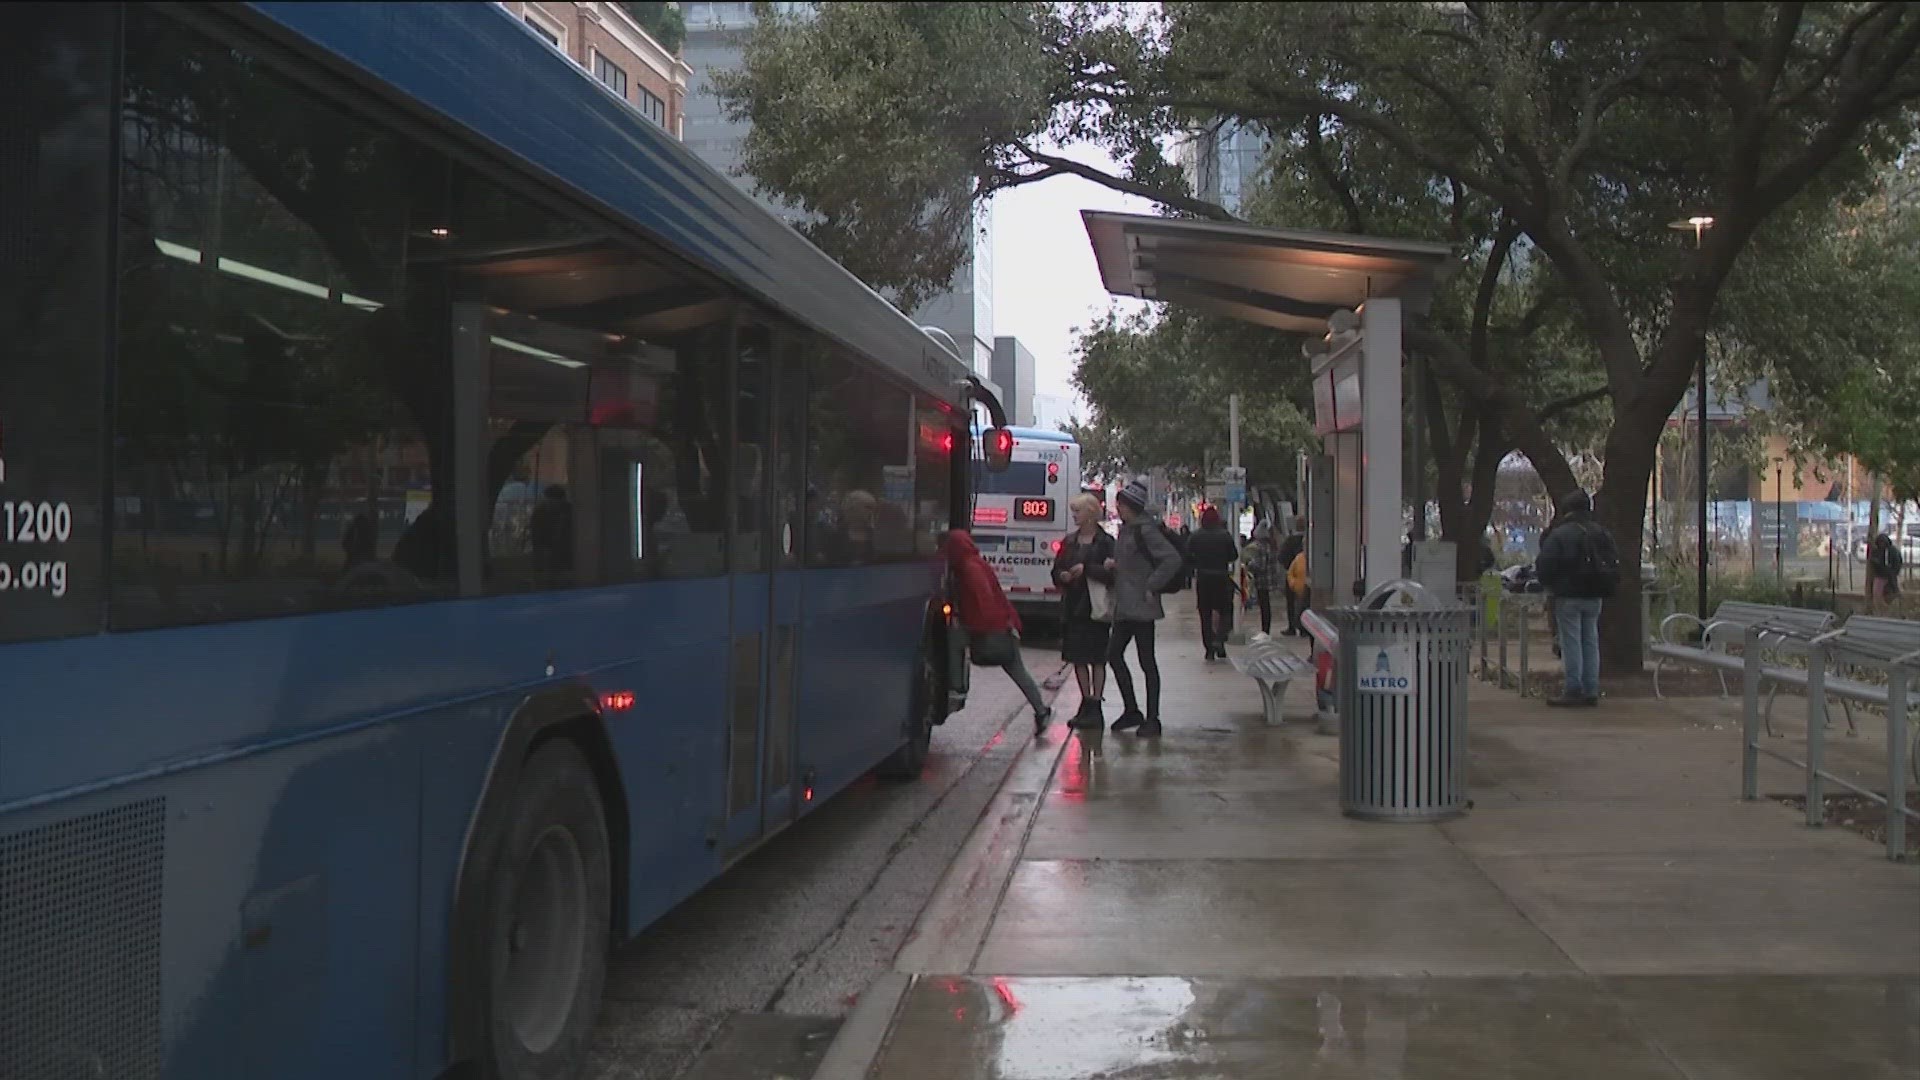 CapMetro is planning on stepping up security at some of its major Austin bus stops and centers. It's a move riders say is badly needed.